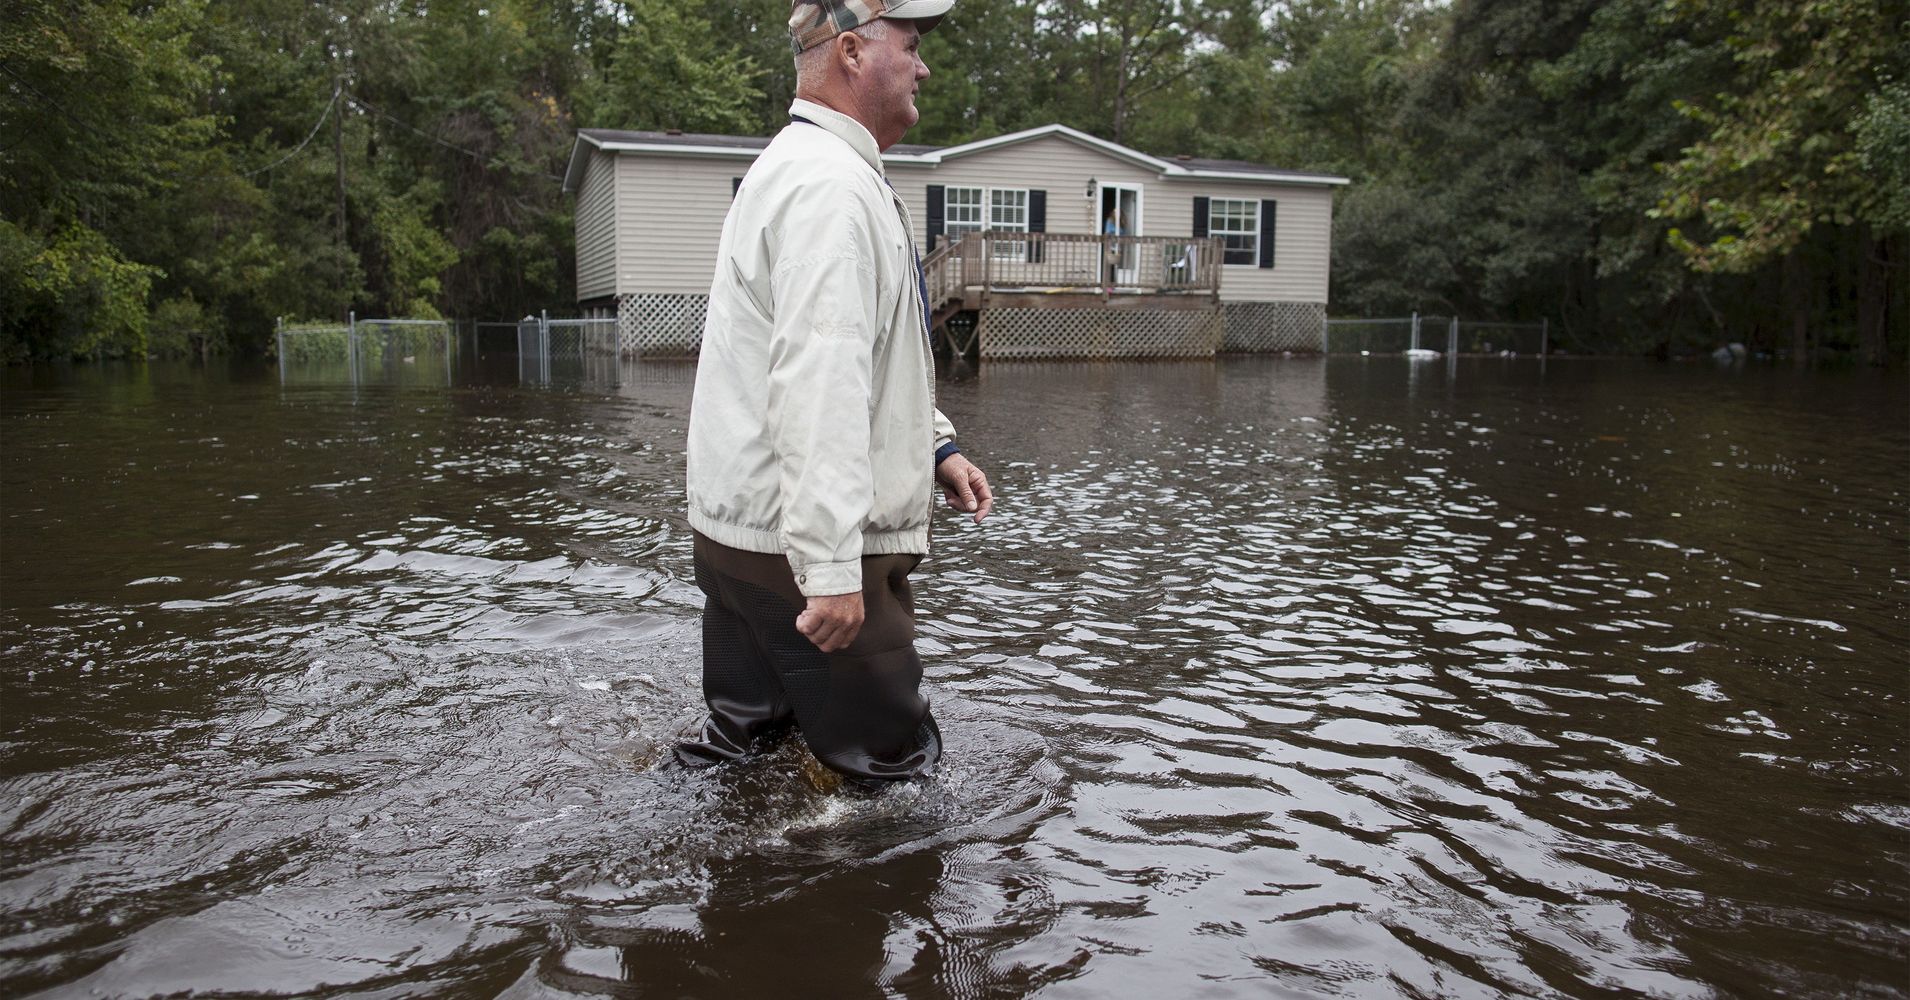 South Carolina Rainfall Is Worst In A Thousand Years, Gov. Haley Says